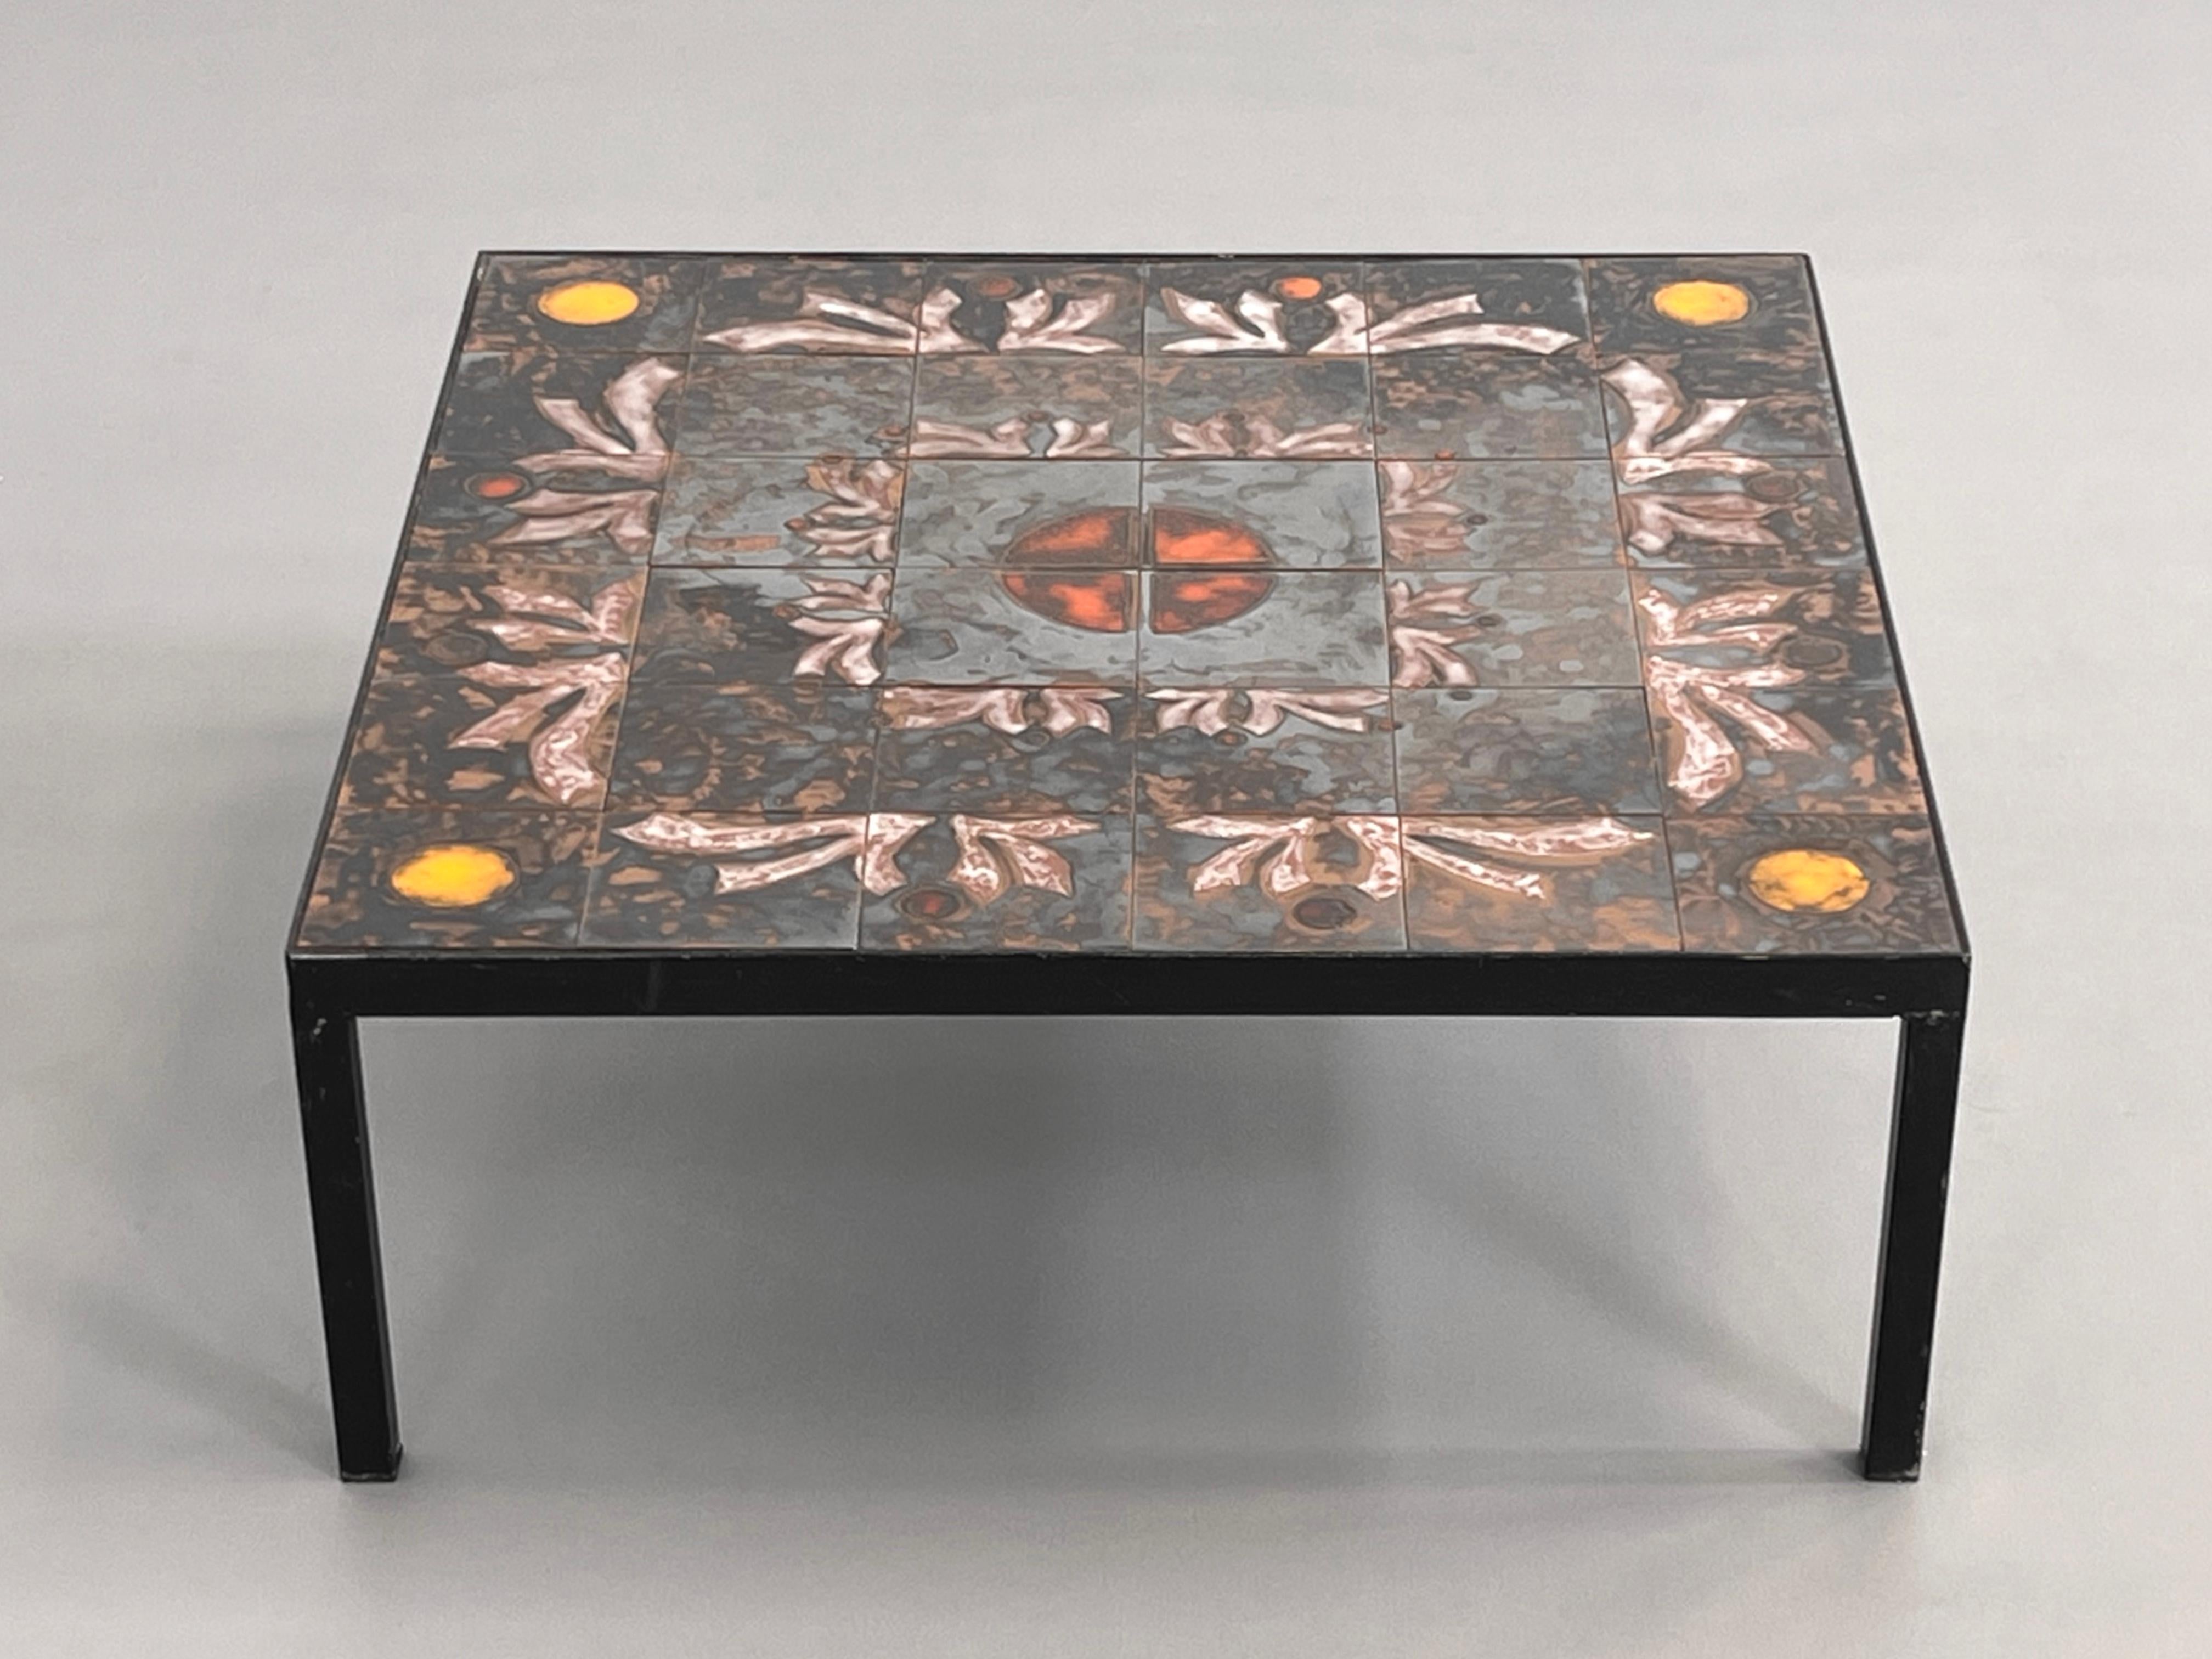 European 1950s 1960s Black Metal Base and Ceramic Tray Large Square Coffee Table